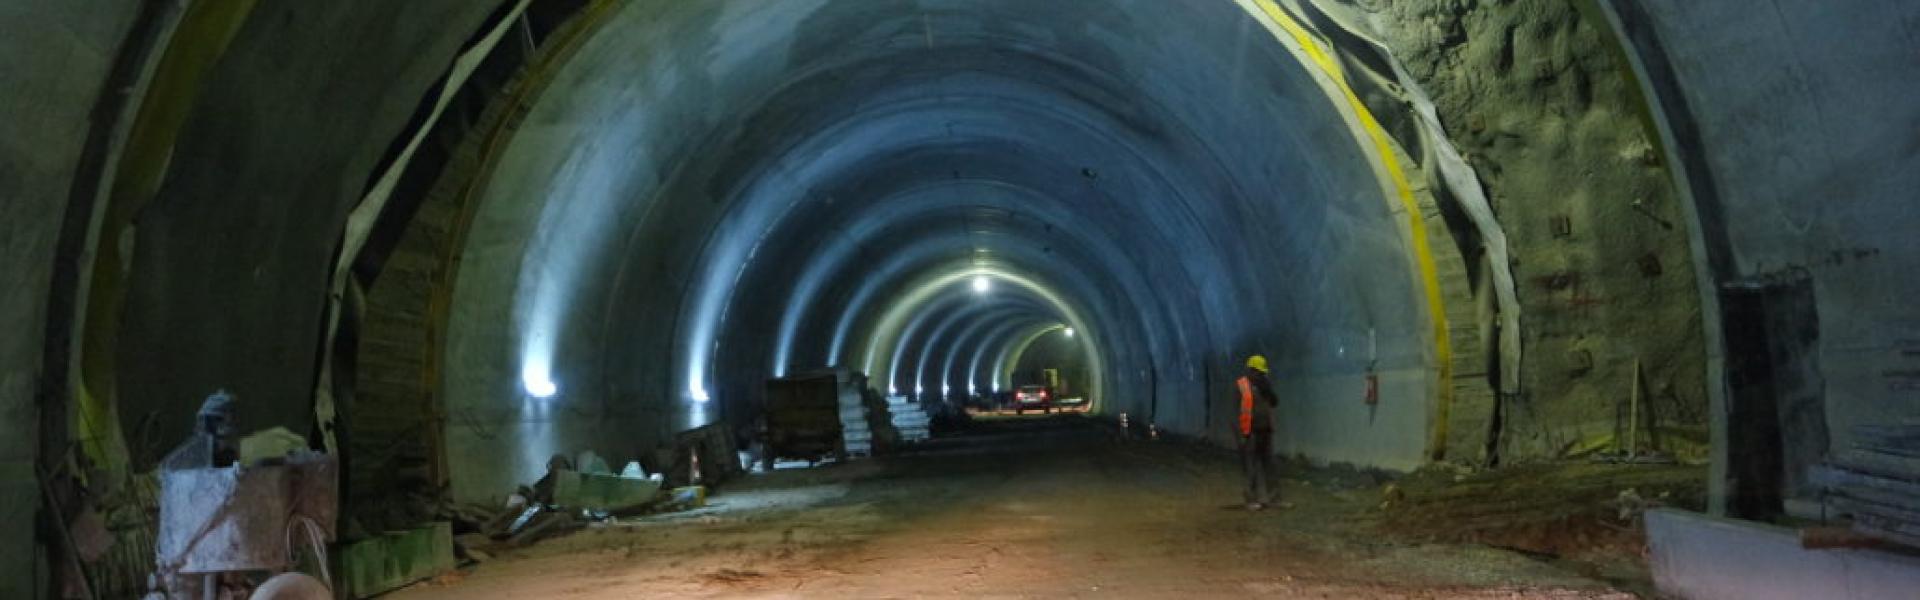 Turks to pay $60 million to subsidise underused Istanbul tunnel - report 2